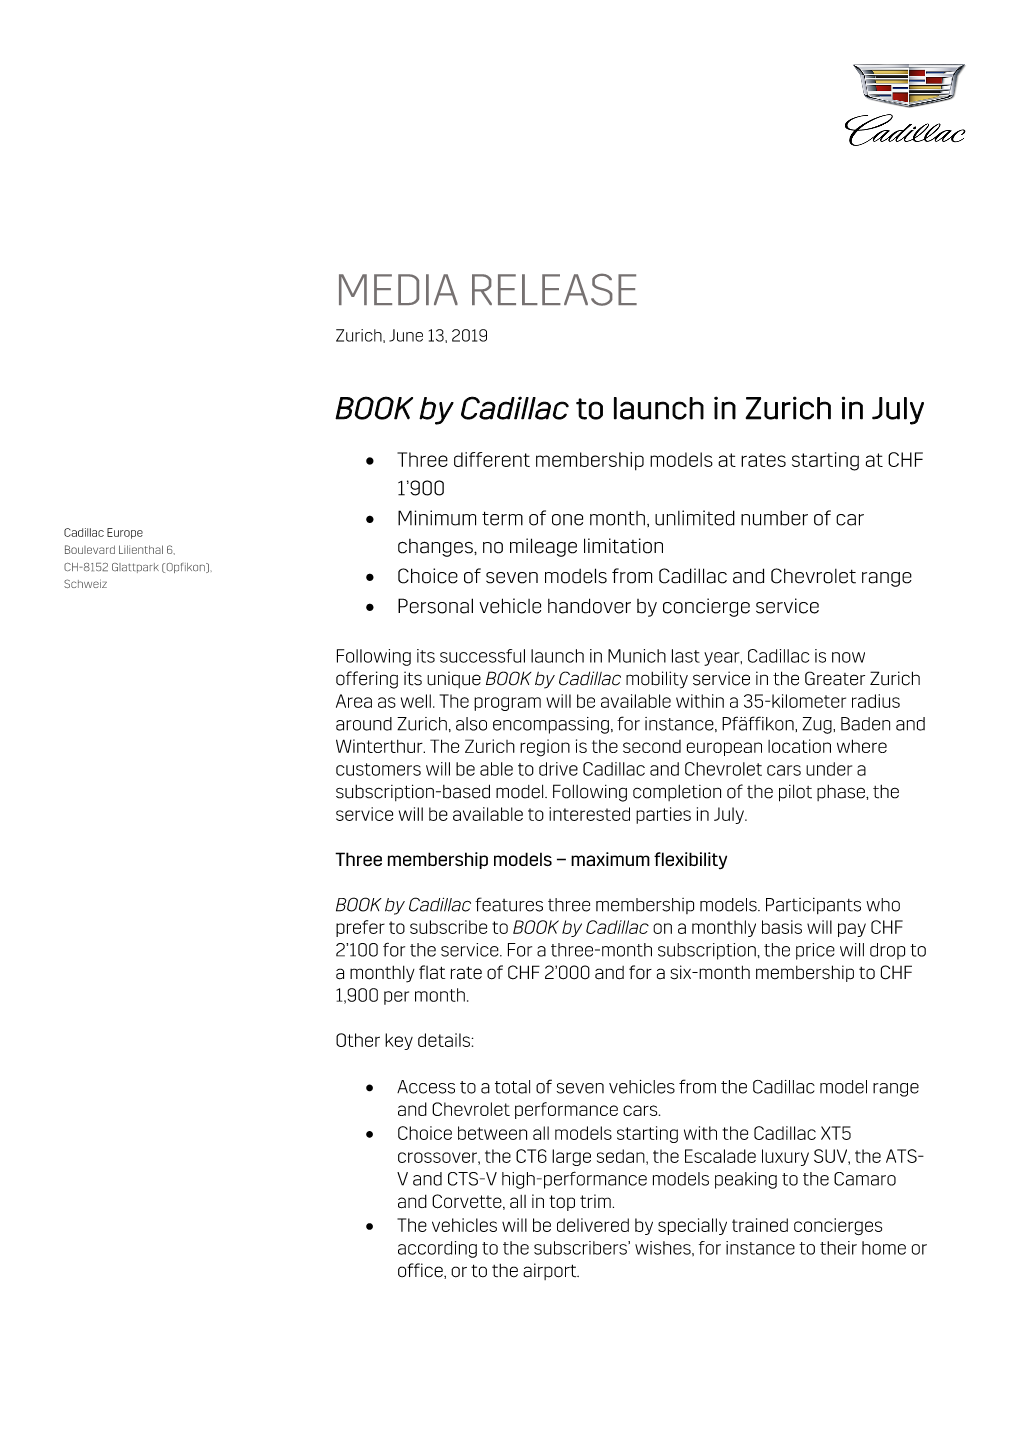 BOOK by Cadillac to Launch in Zurich in July